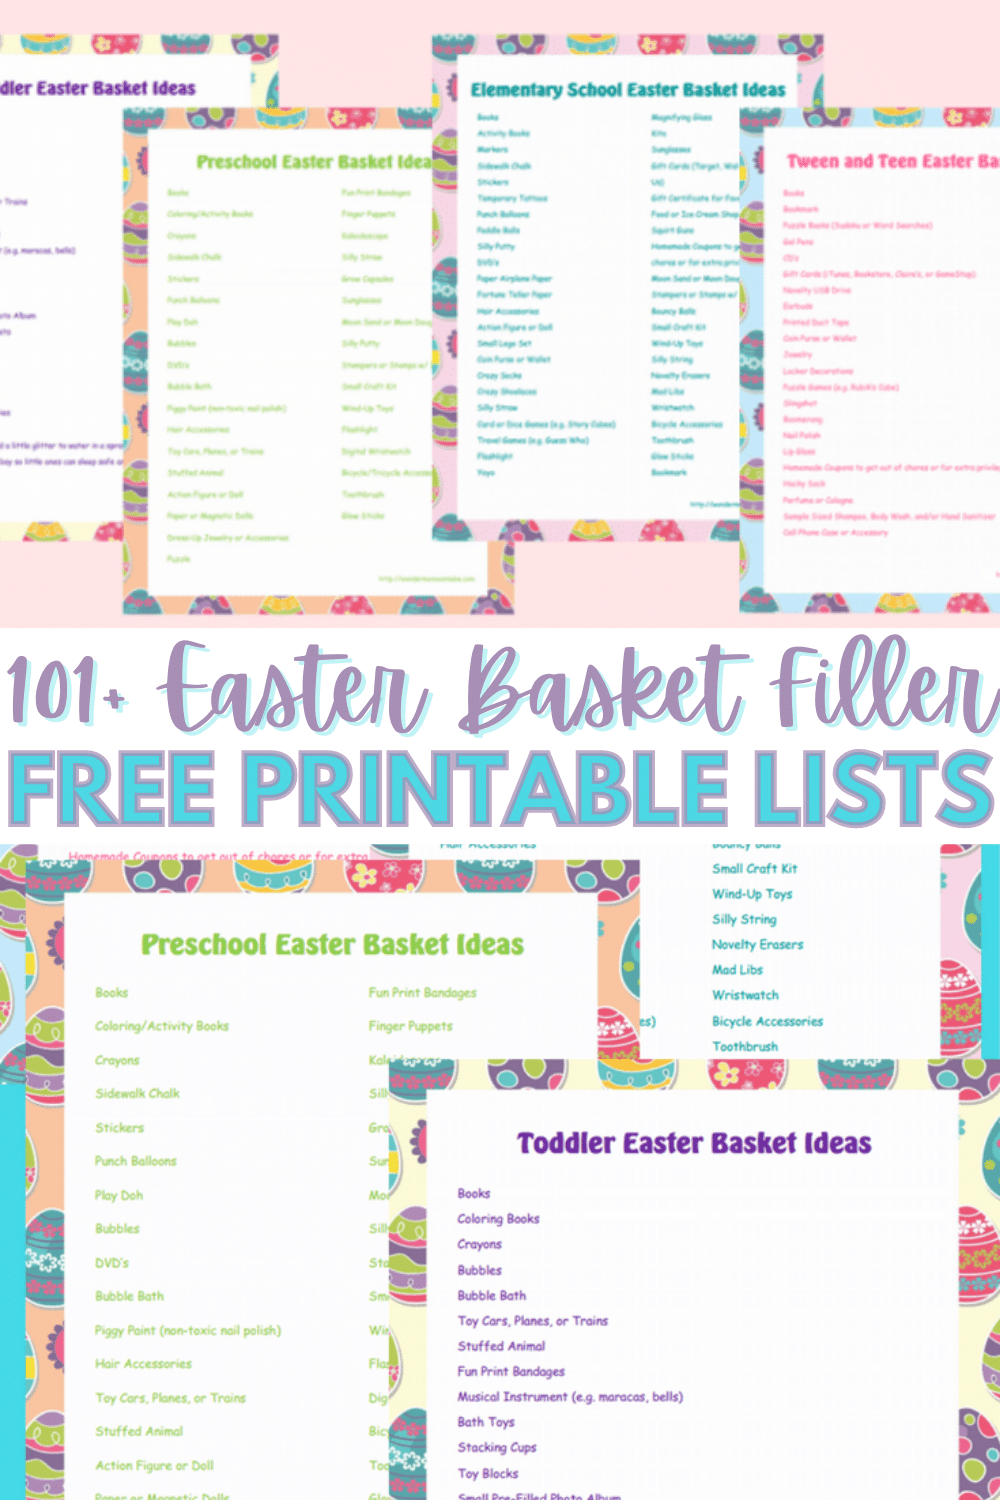 Over 100 Easter ideas for basket fillers plus ideas for decorating and organizing. There are four printable lists of ideas for toddlers through teens. #easter #easterbasket #freeprintable #easterbasketideas via @wondermomwannab